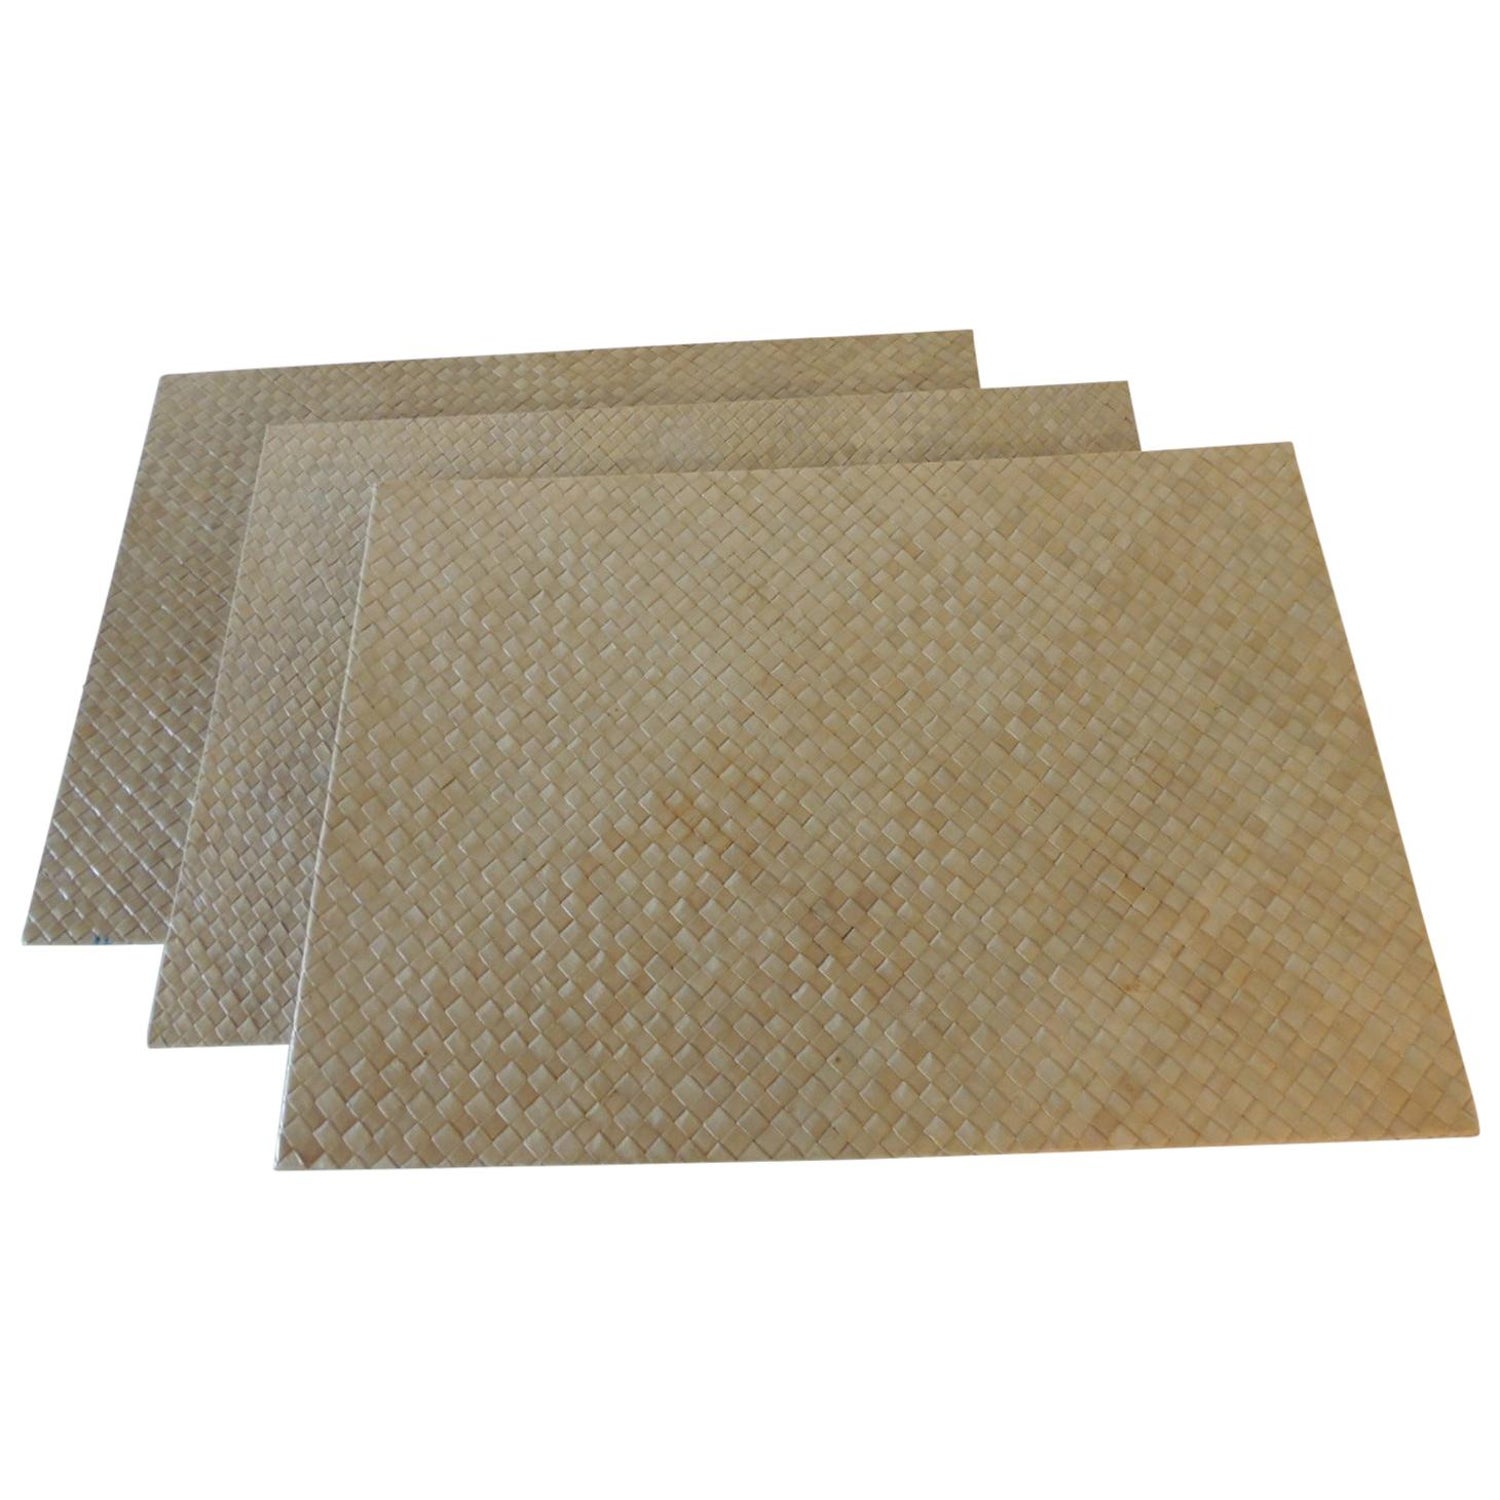 Set of '6' Large Woven Palm Fiber Placemats For Sale at 1stDibs